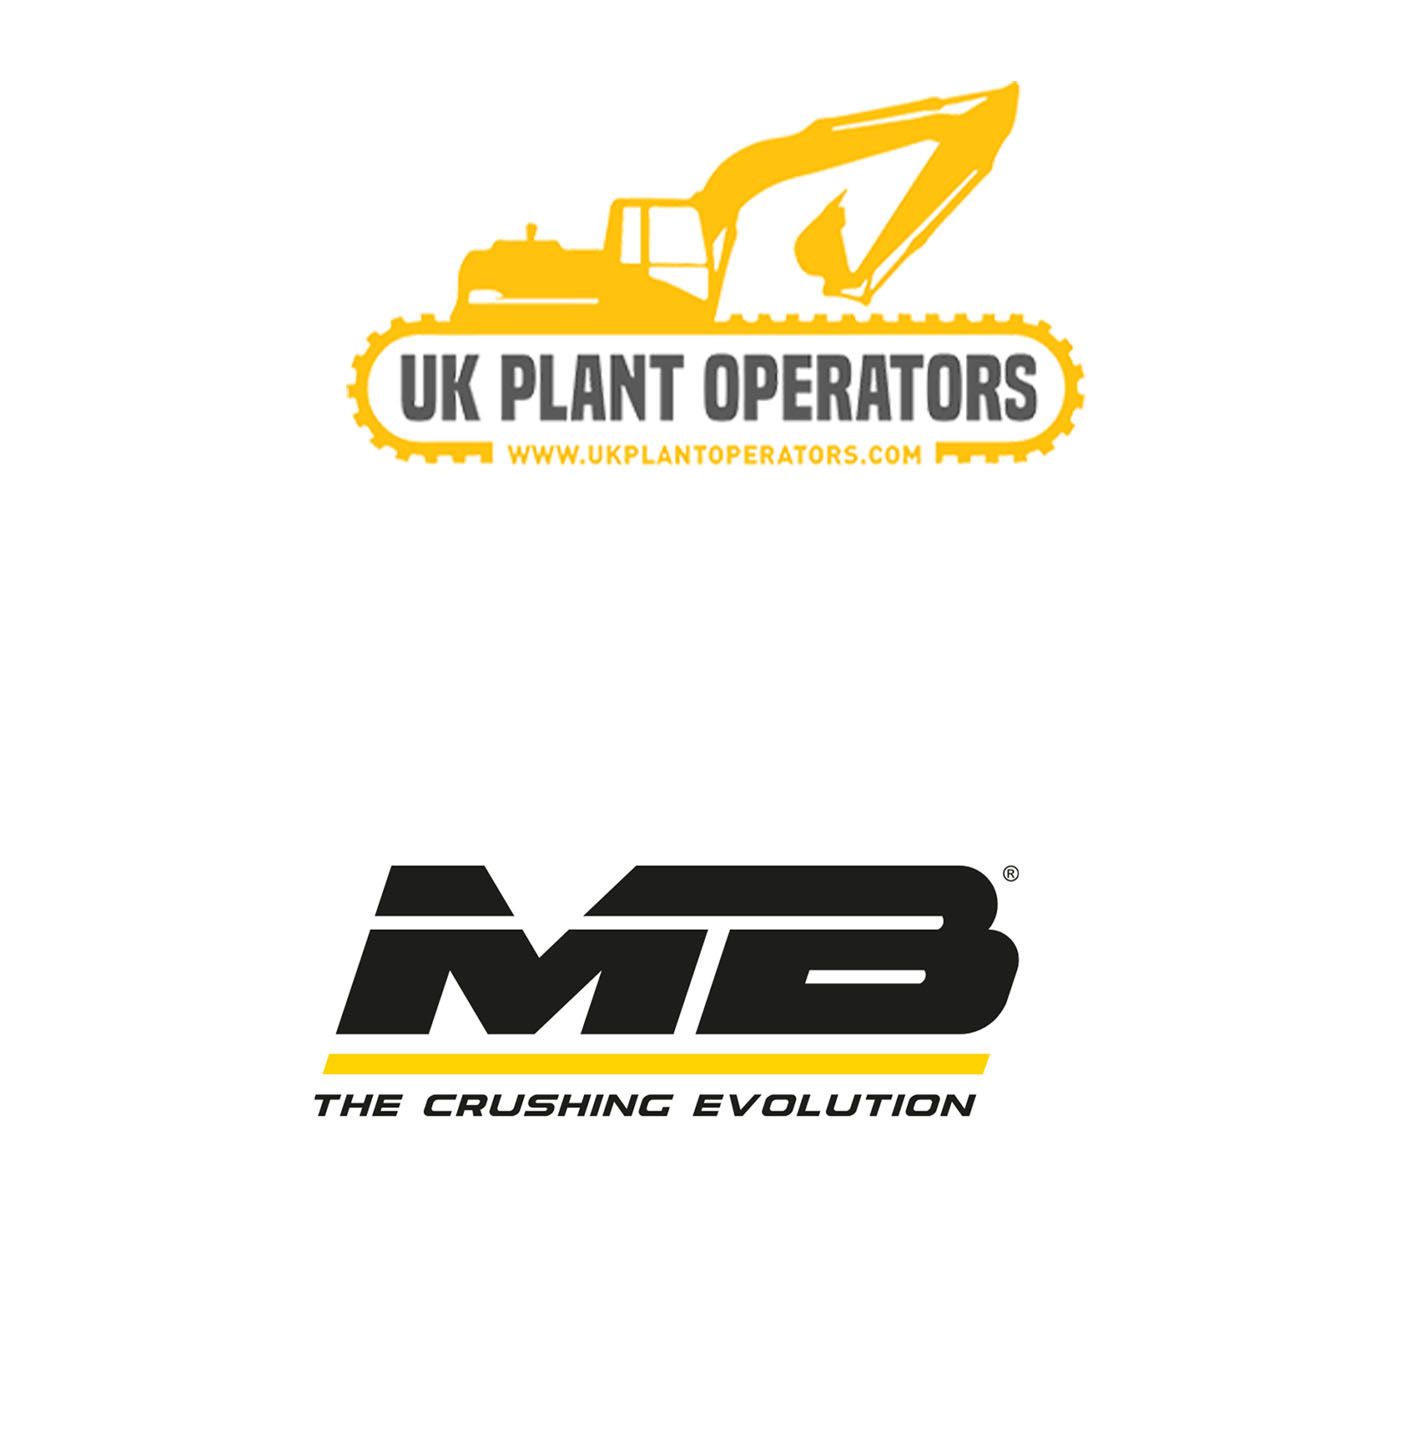 Final of Uk plant operator competition